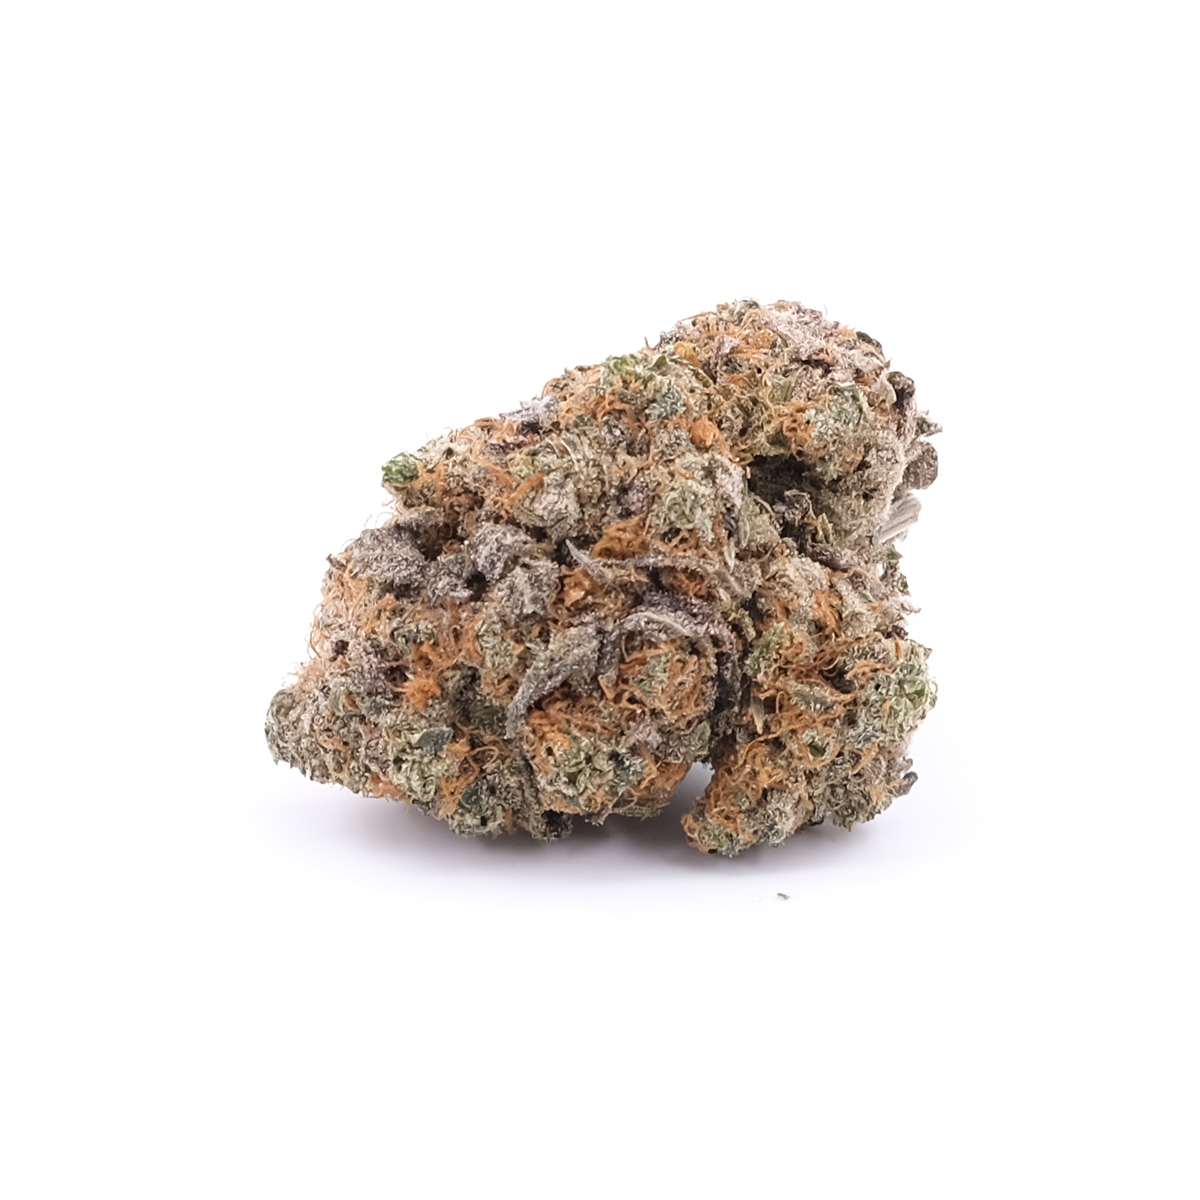 Diamond OG 1 Indica Dominant Hybrid By Queen of Quads 2